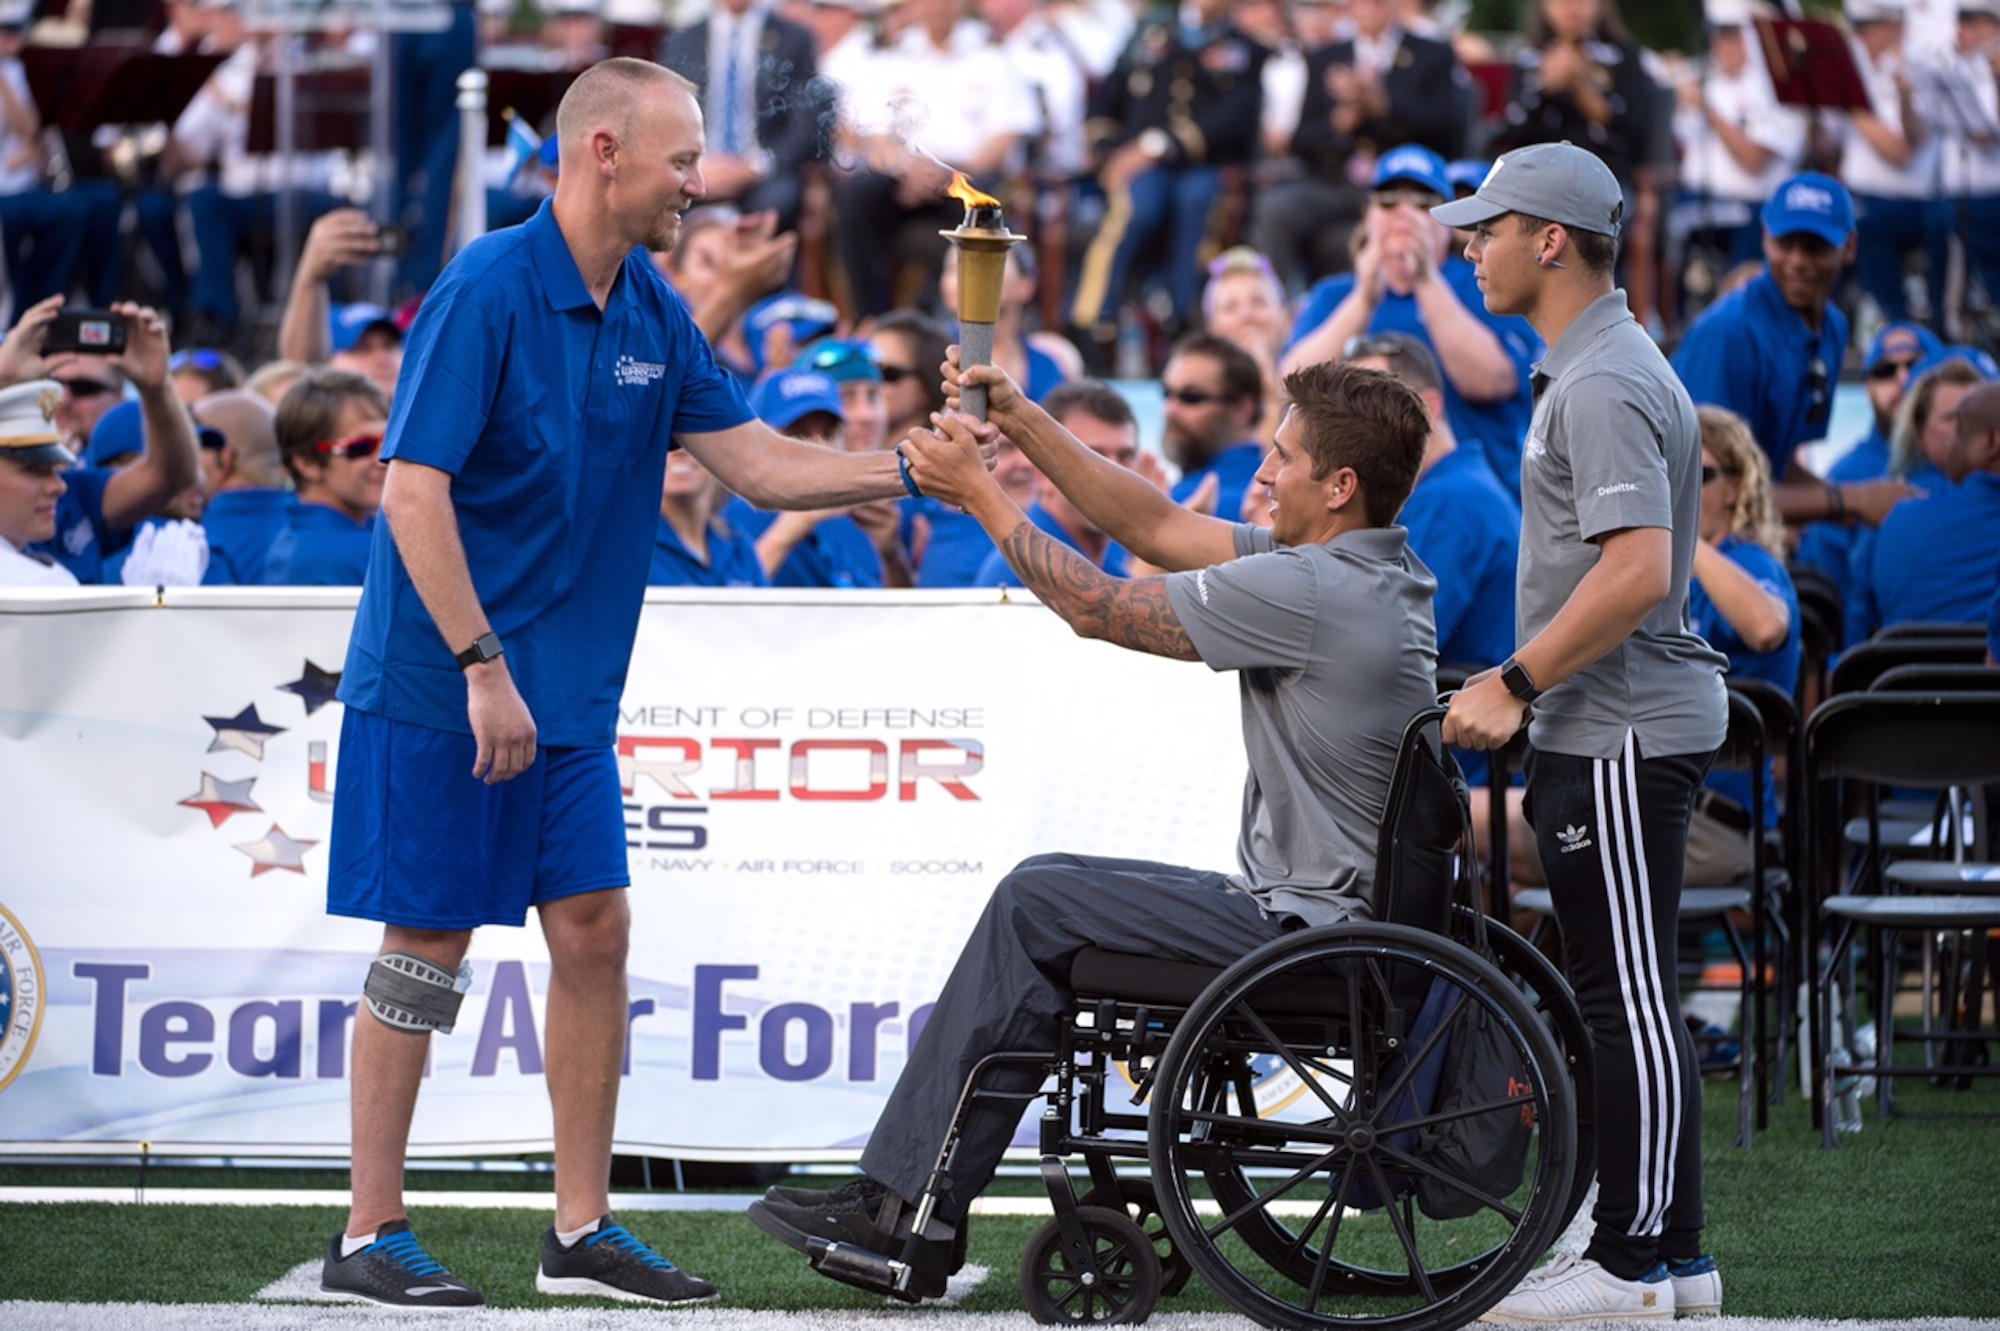 Retired Air Force Capt. Chris Cochrane, left, accepts the 2016 Department of Defense Warrior Games torch from Navy Lt. Ramesh Haytasingh of the U.S. Special Operations Command team during opening ceremonies at the U.S. Military Academy in West Point, N.Y., June 15, 2016. With Haytasingh is his son, Tobias. (Department of Defense photo/EJ Hersom)